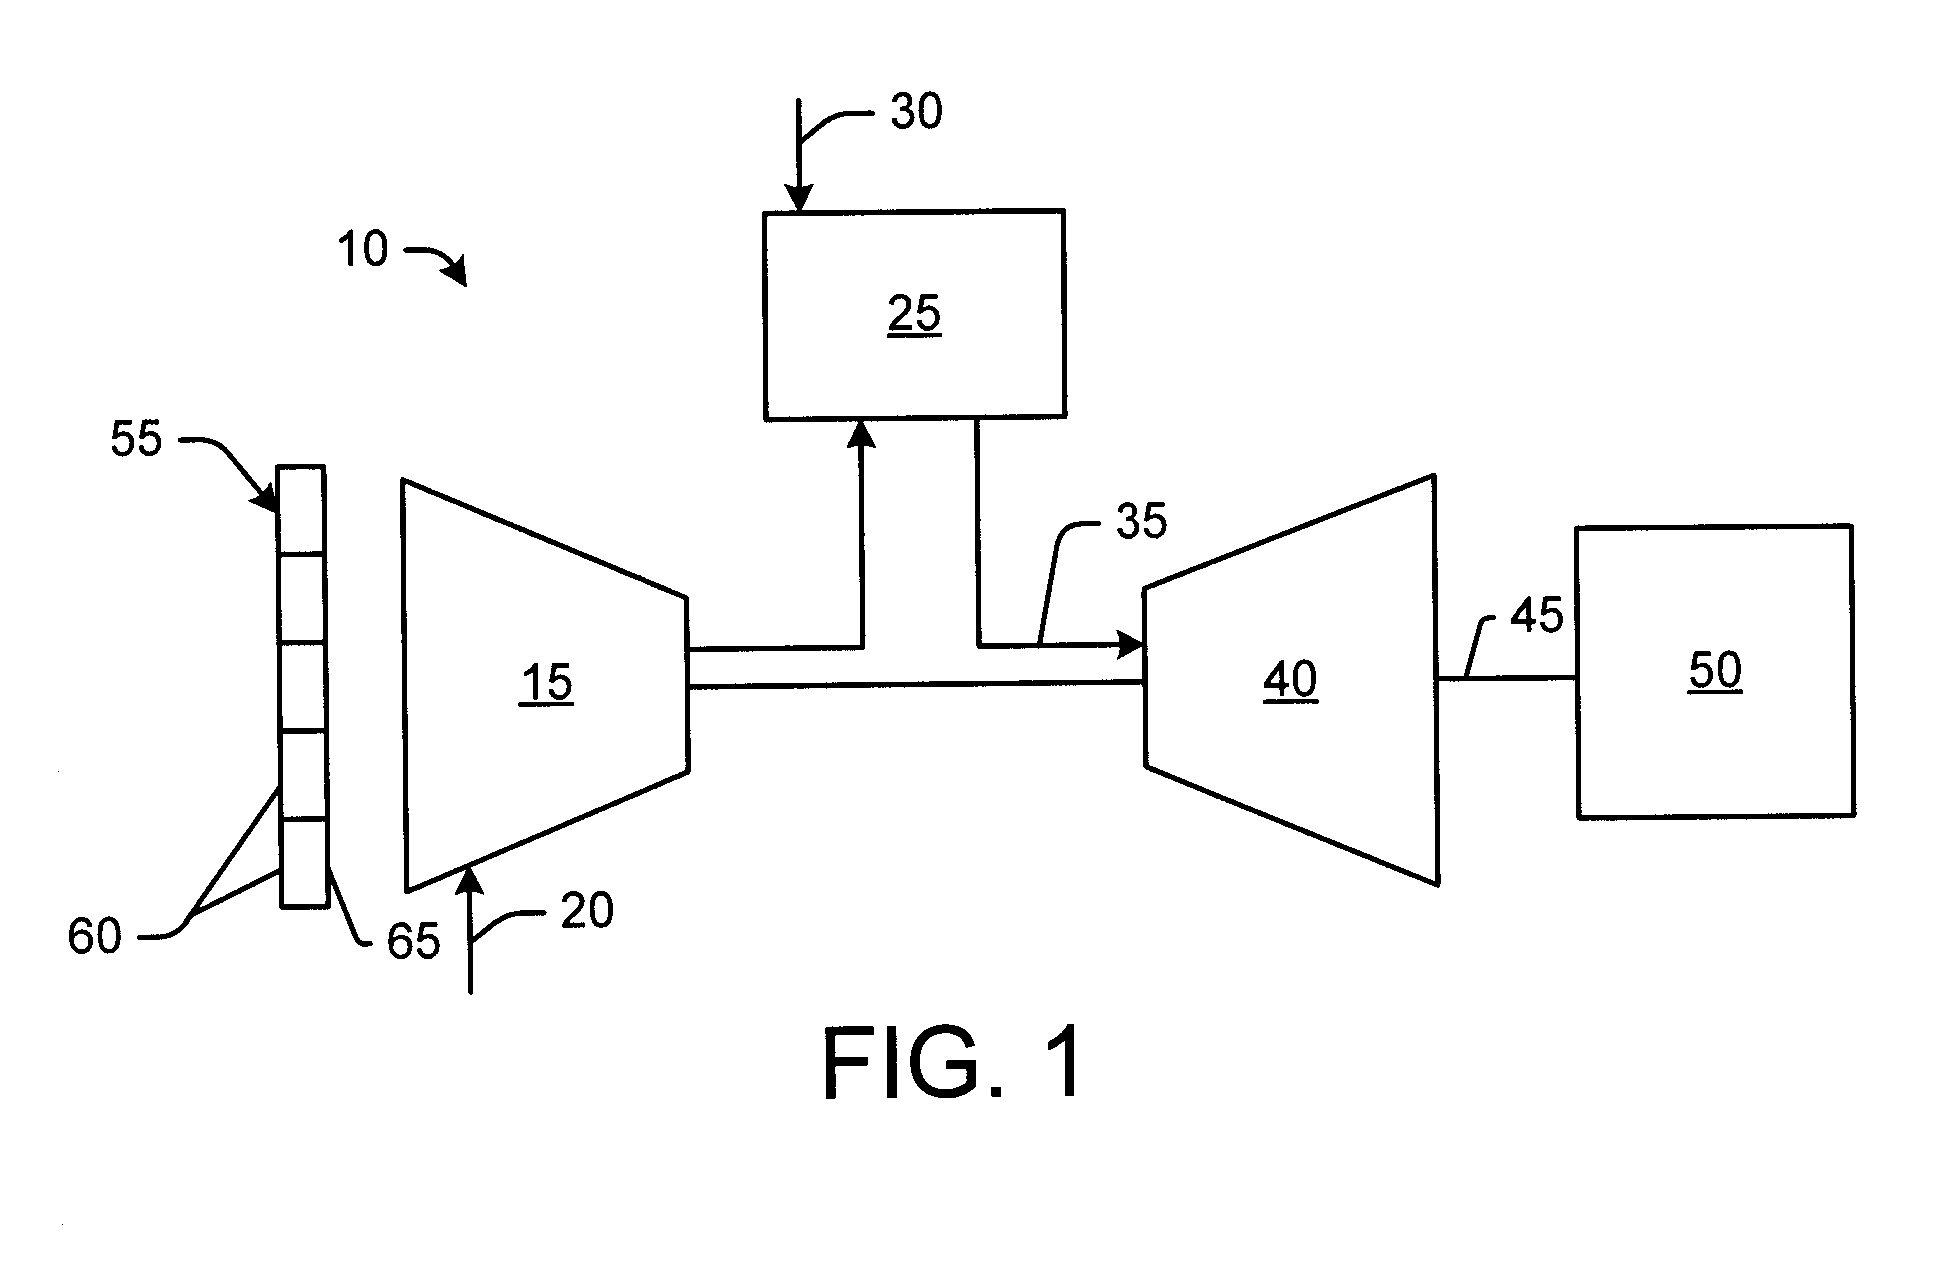 Gas Turbine Filtration System with Inlet Filter Orientation Assembly